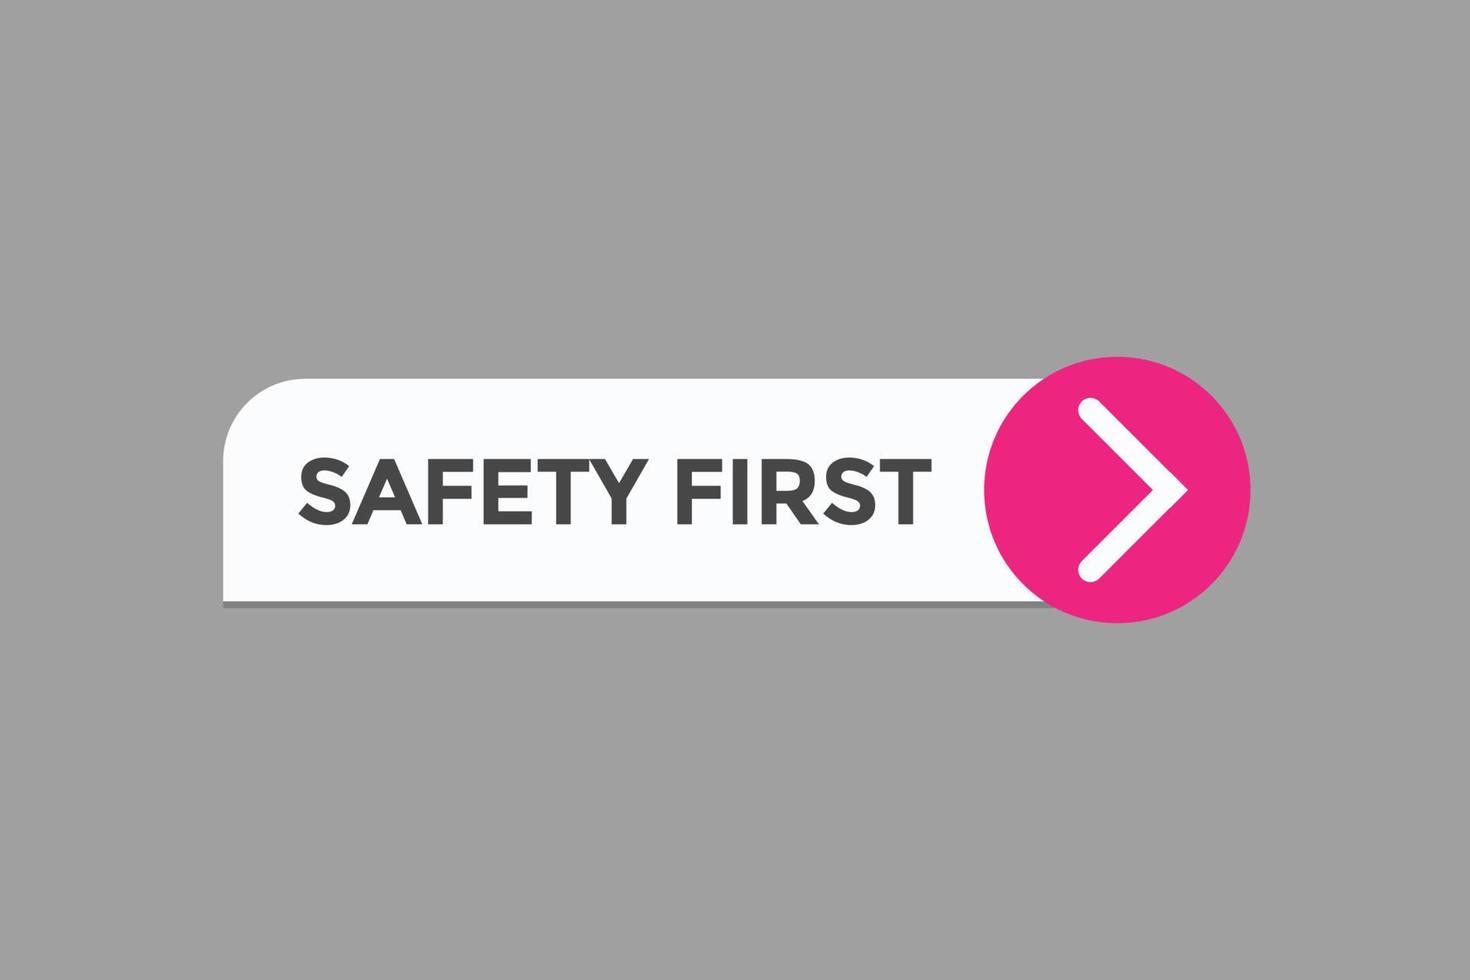 safety first button vectors.sign label speech bubble safety first vector